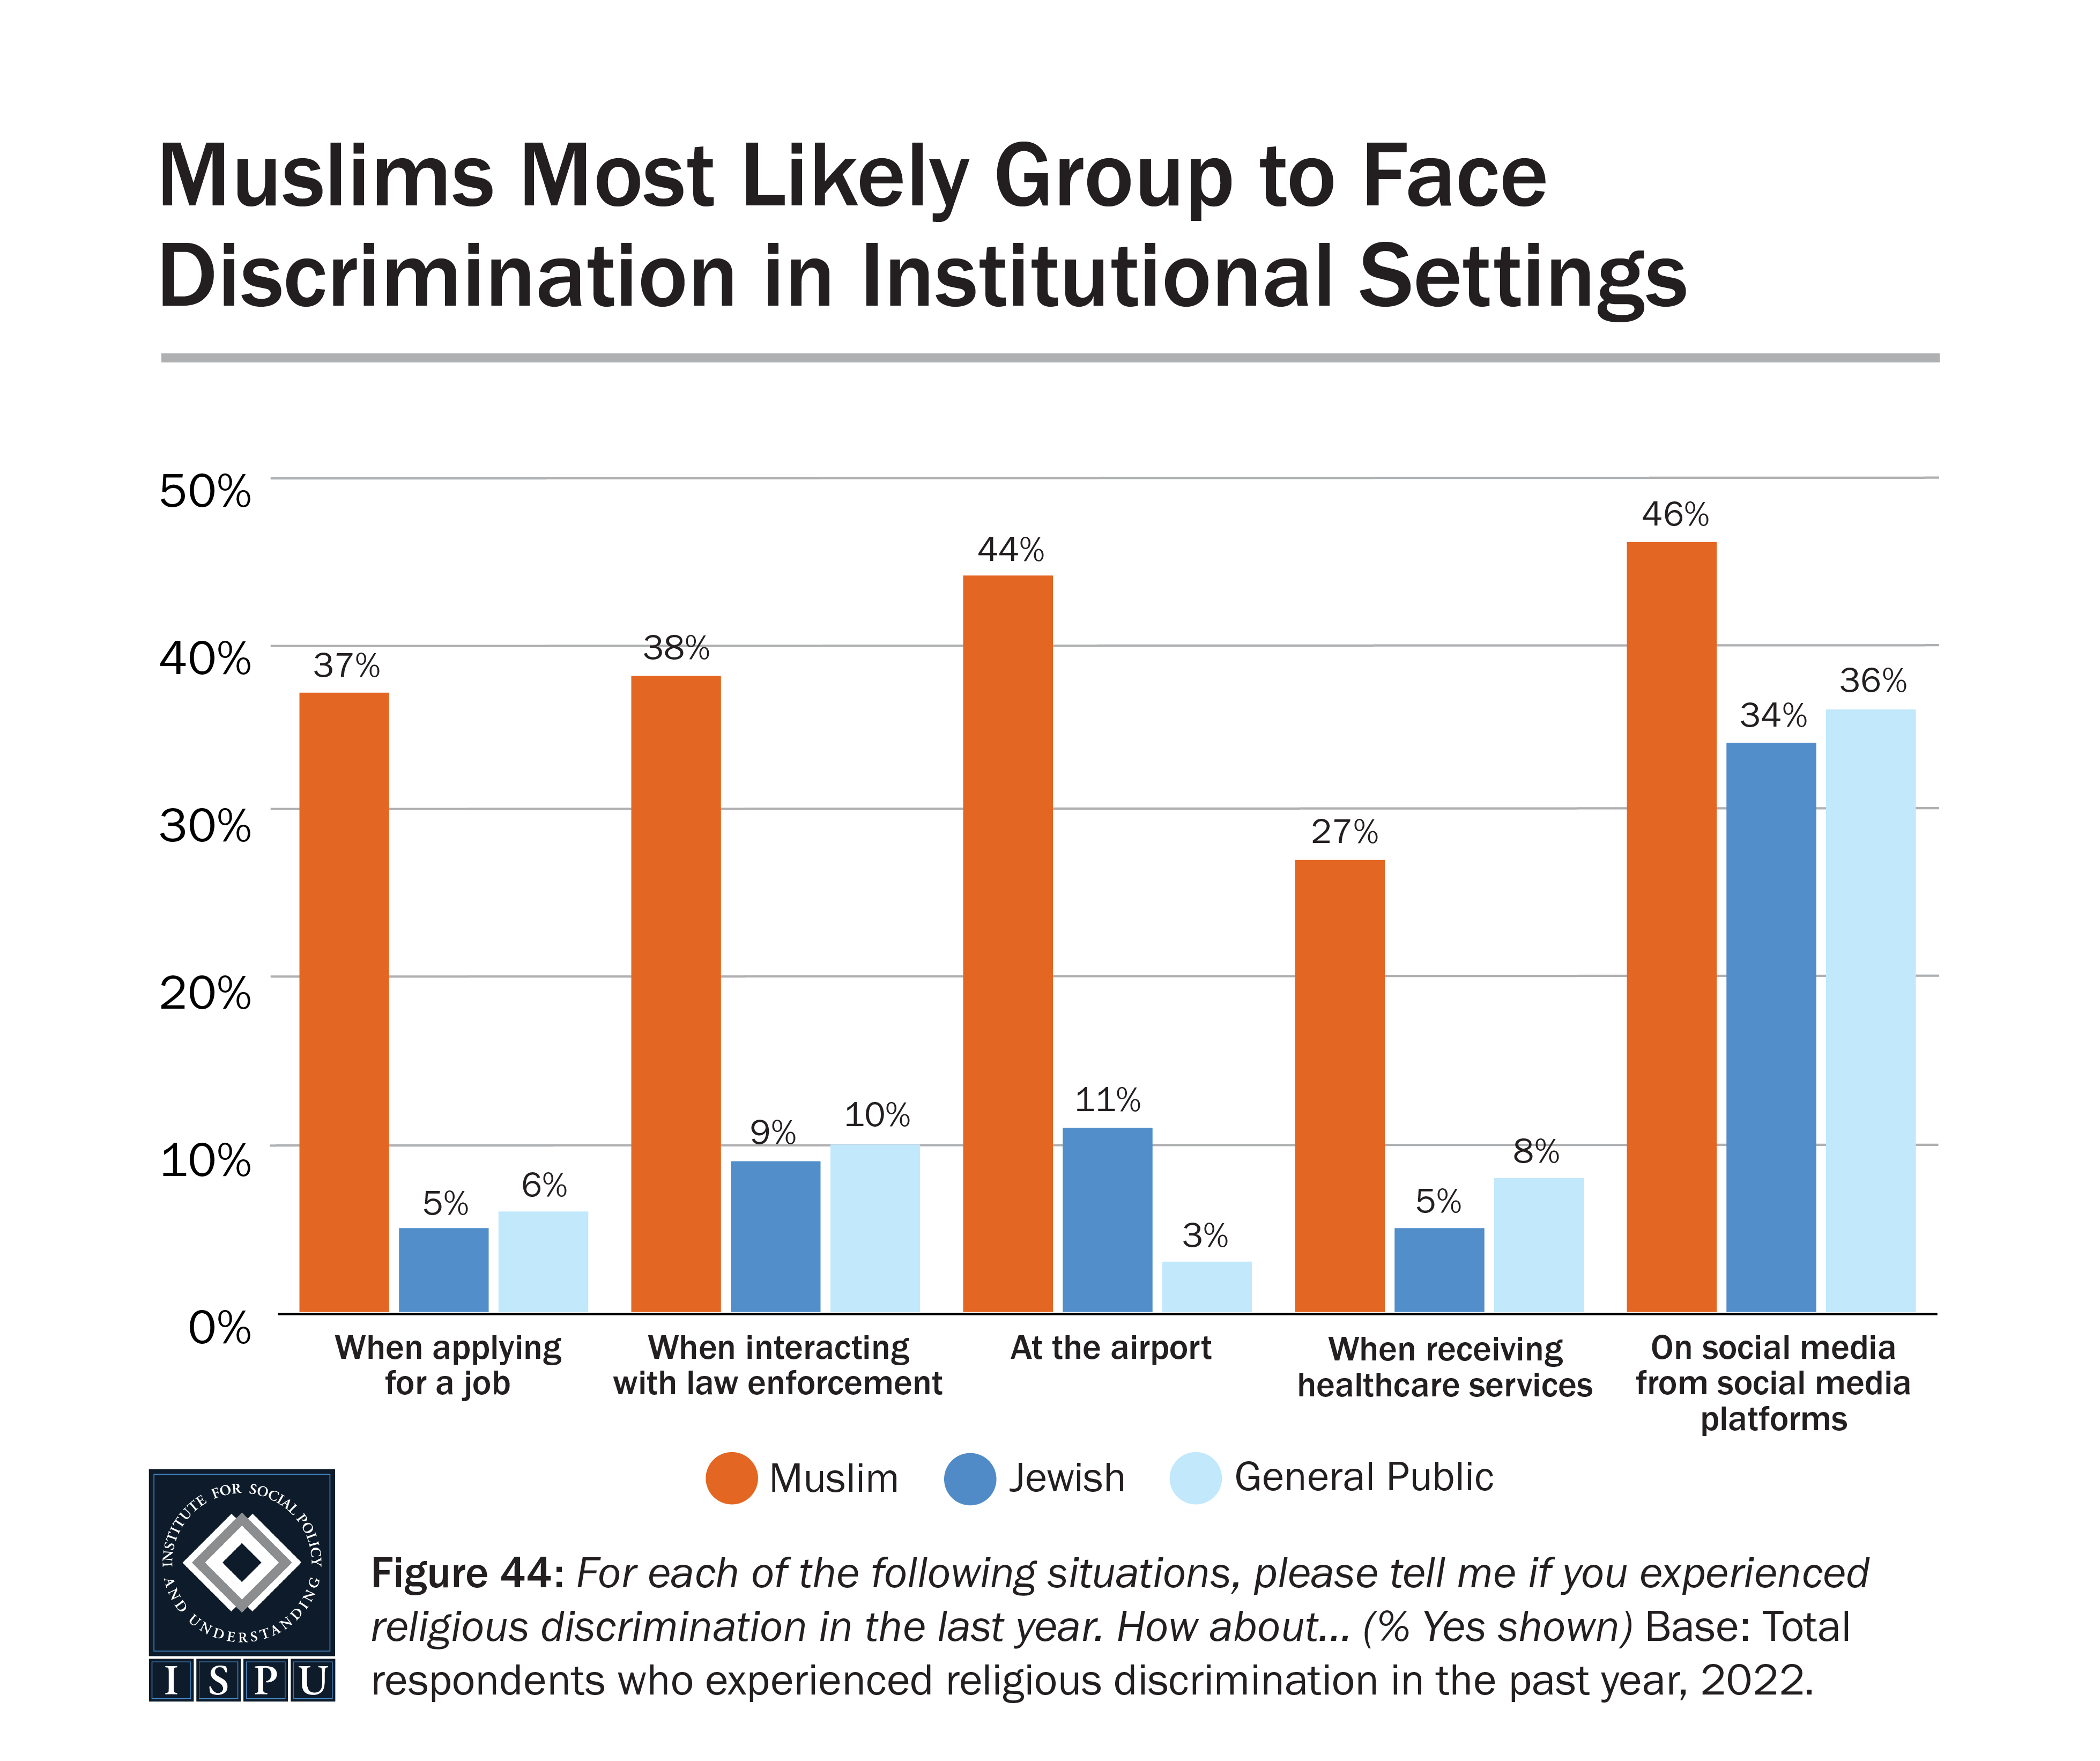 A bar graph showing various instiutional settings where religious discrimination occurred among Muslims, Jews, and the general public who report facing religious discrimination in the past year.